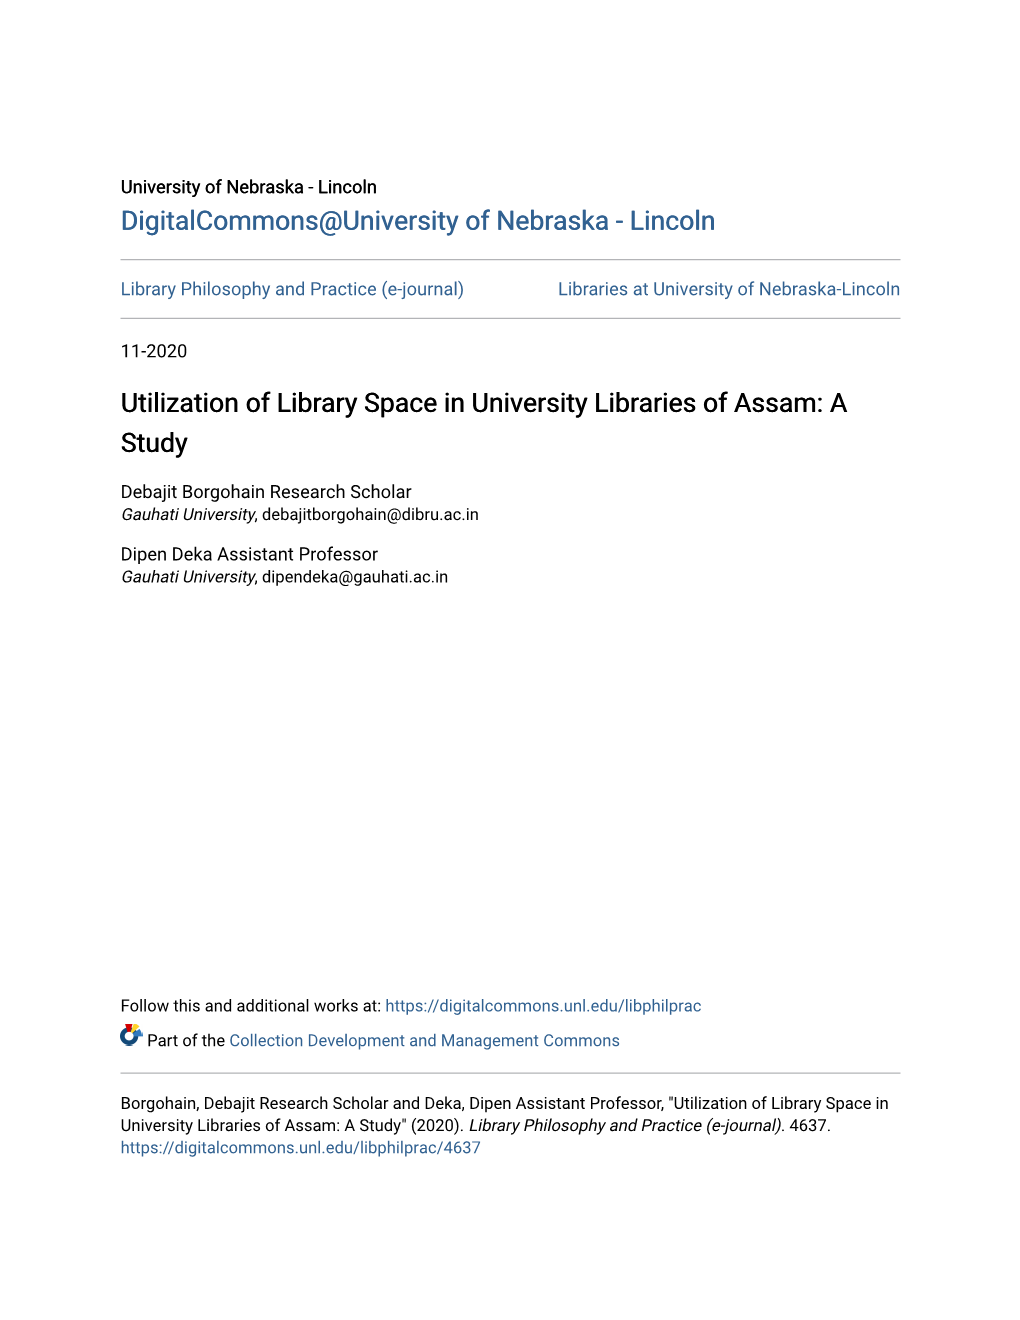 Utilization of Library Space in University Libraries of Assam: a Study